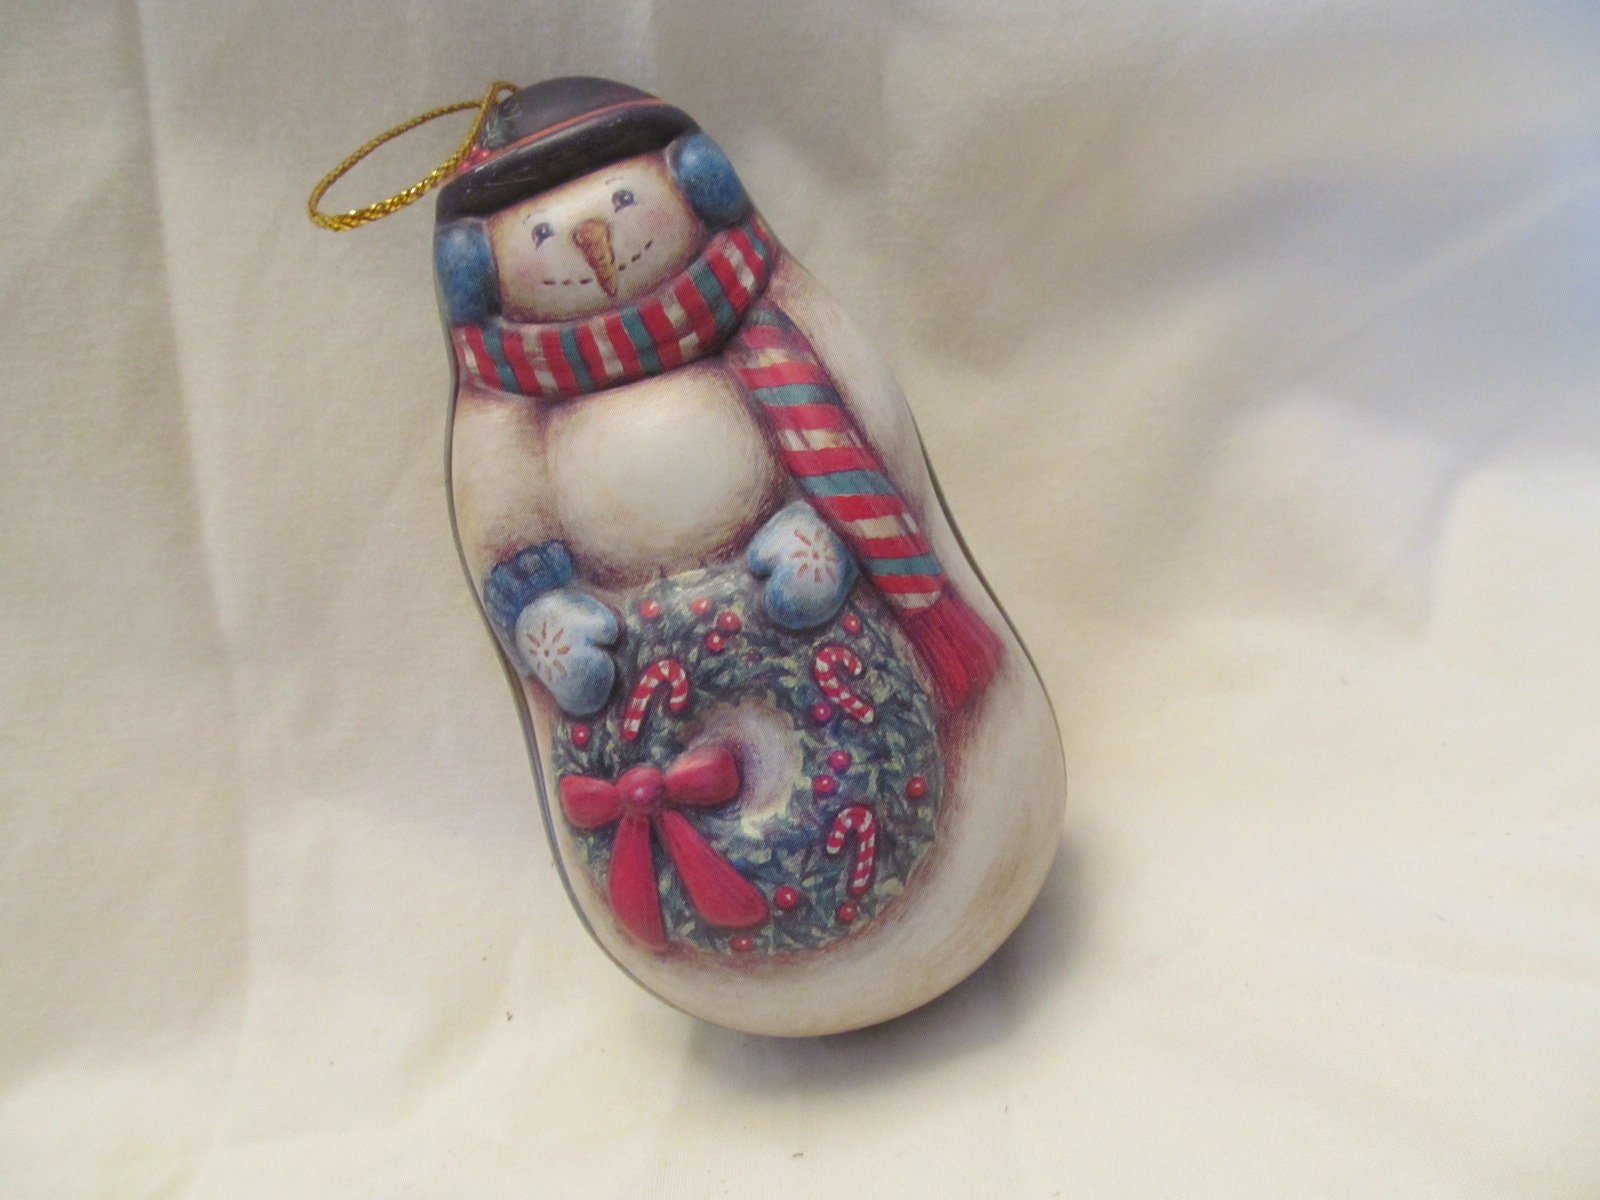 Cute Little Guy to Hang On Your Holiday Tree or Wreath Matte Finish Snowman Ornament Gift Holiday Home Decoration Fun to Give to Kids